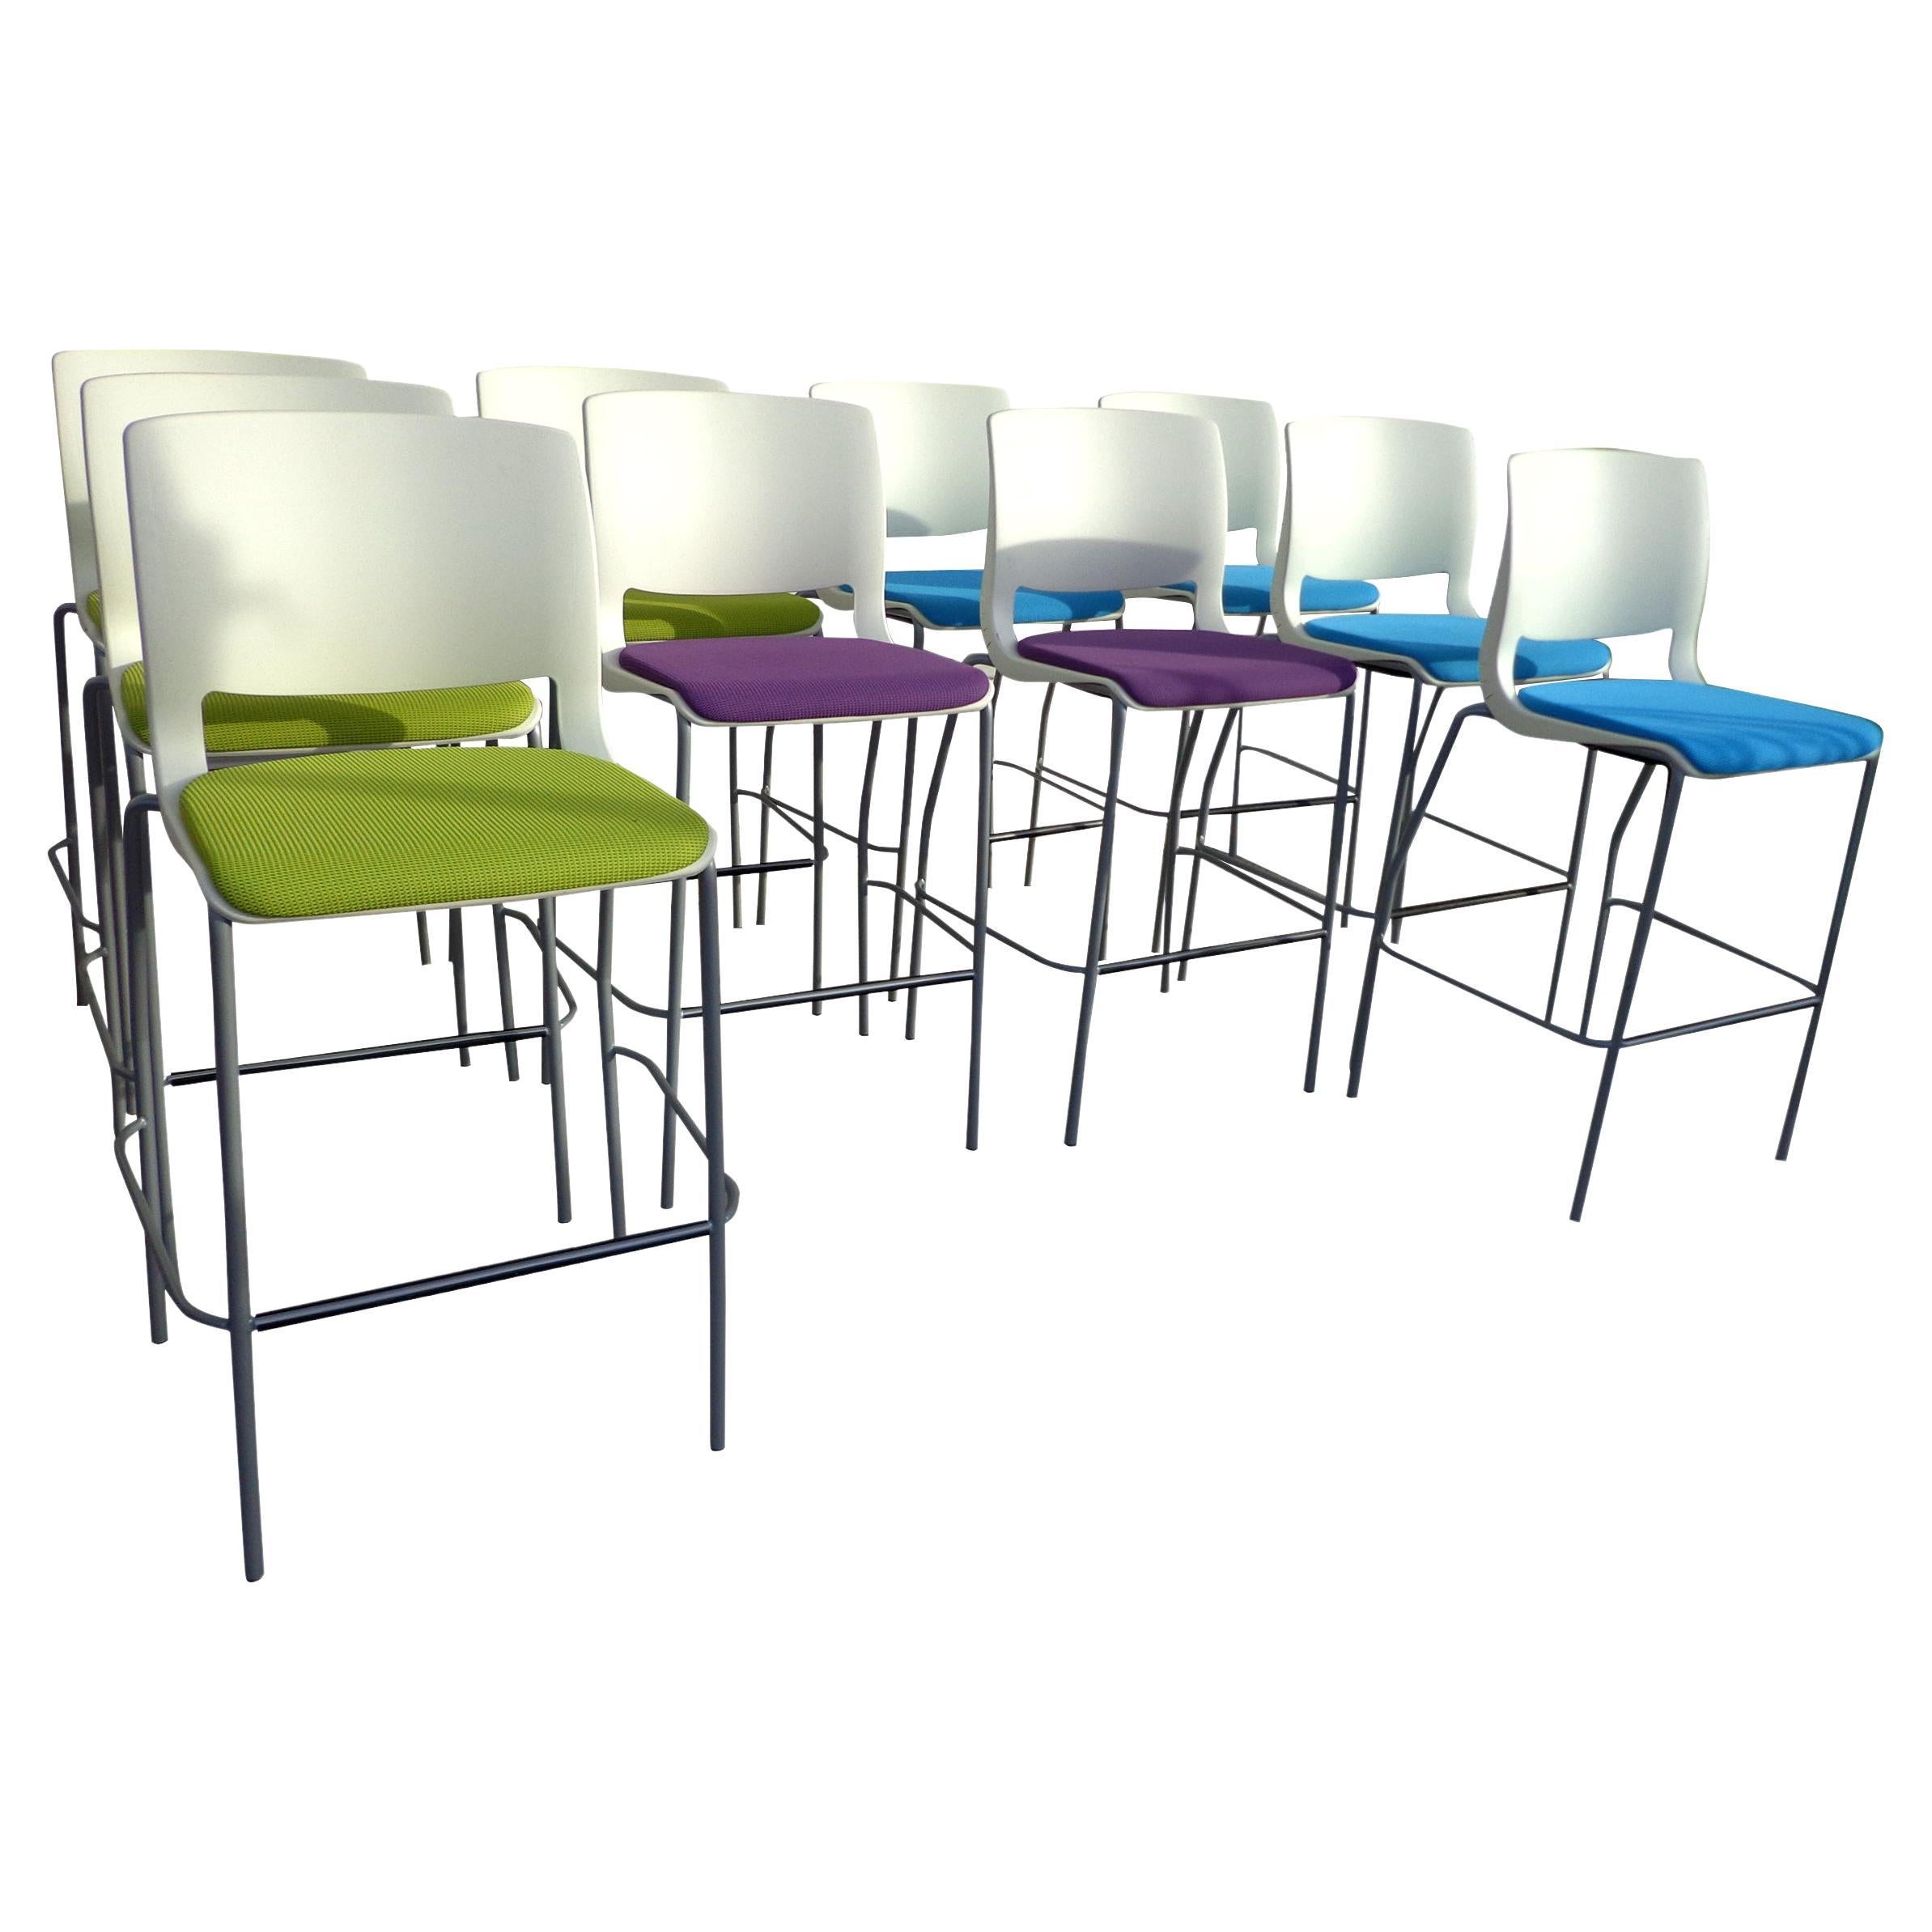 1 Teknion Variable stool by Alessandro Piretti

Designed by Alessandro Piretti, Variable is ideal for
informal spaces where reconfiguration is encouraged, yet durability and style
remain essential. 
Variable features a one-piece molded shell